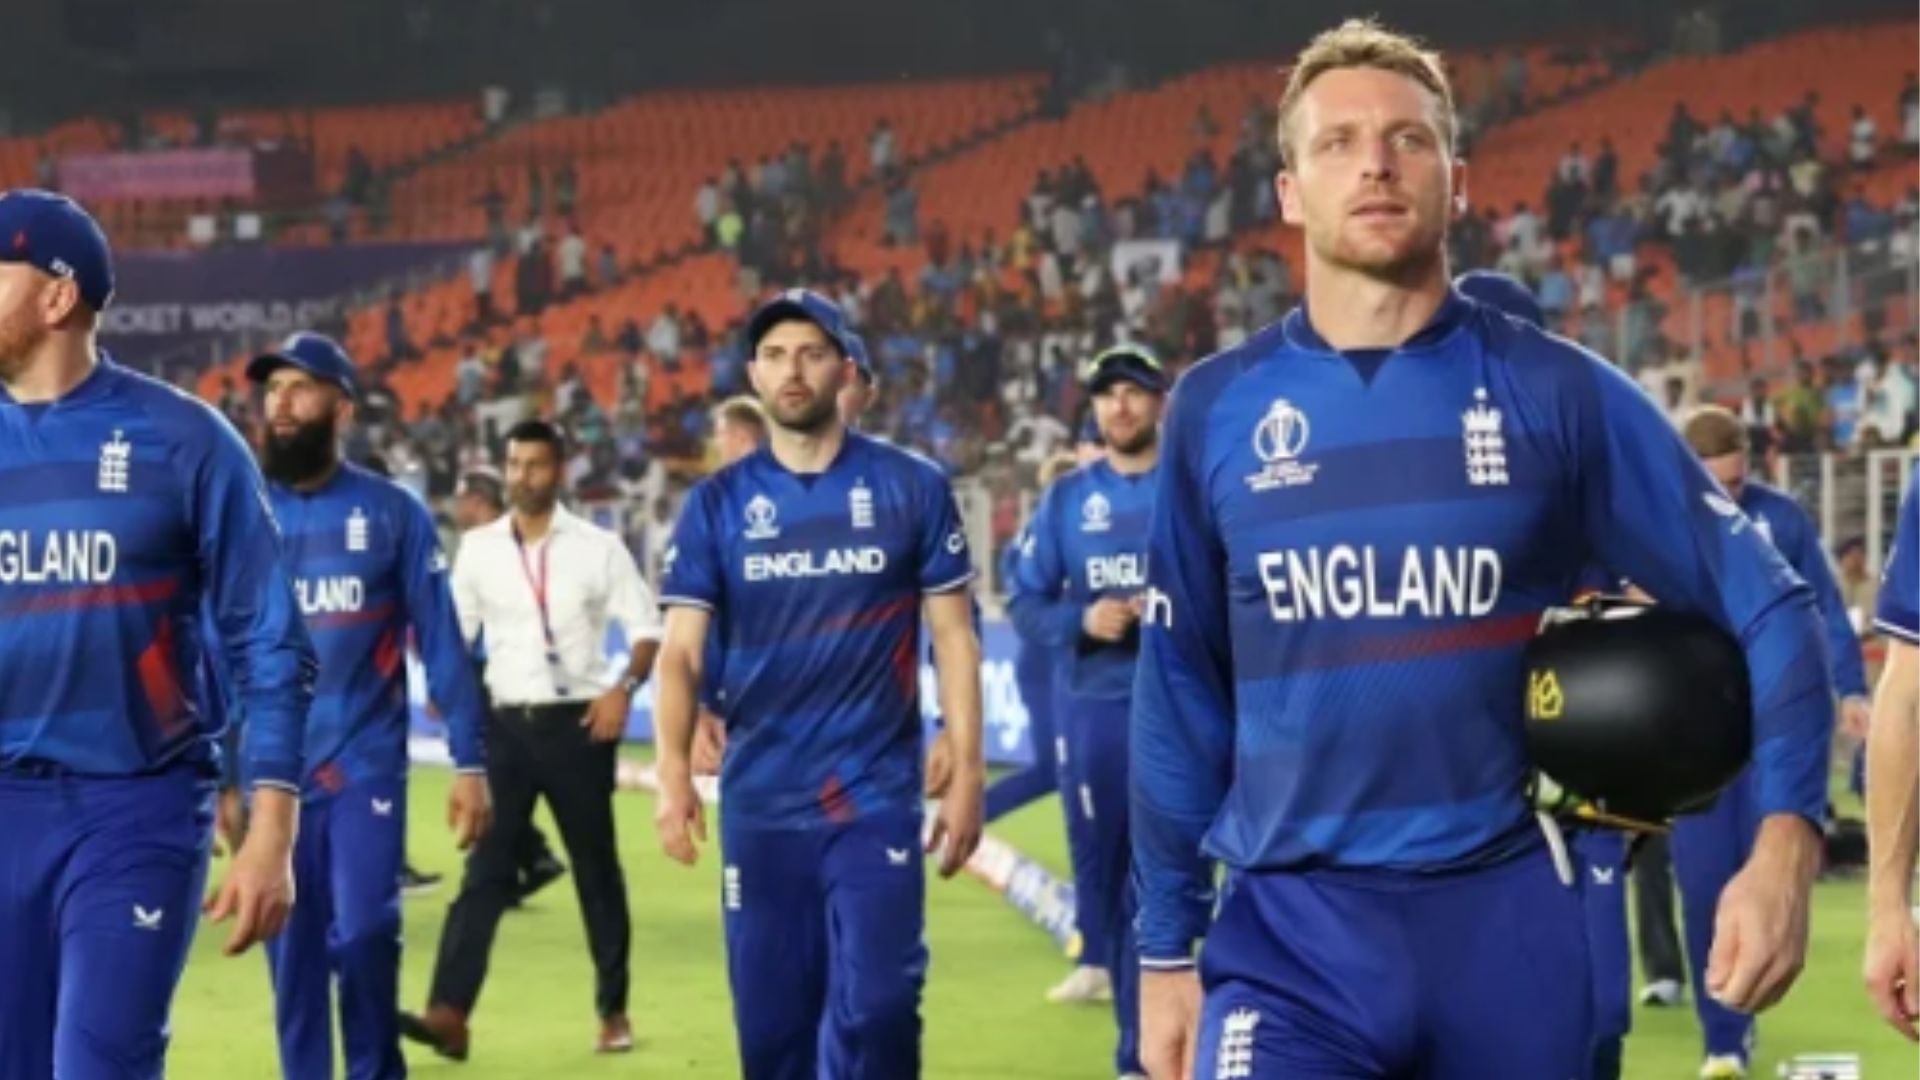 A dejected looking Buttler walking off the field after a thrashing at the hands of New Zealand. (Pic: Getty) 